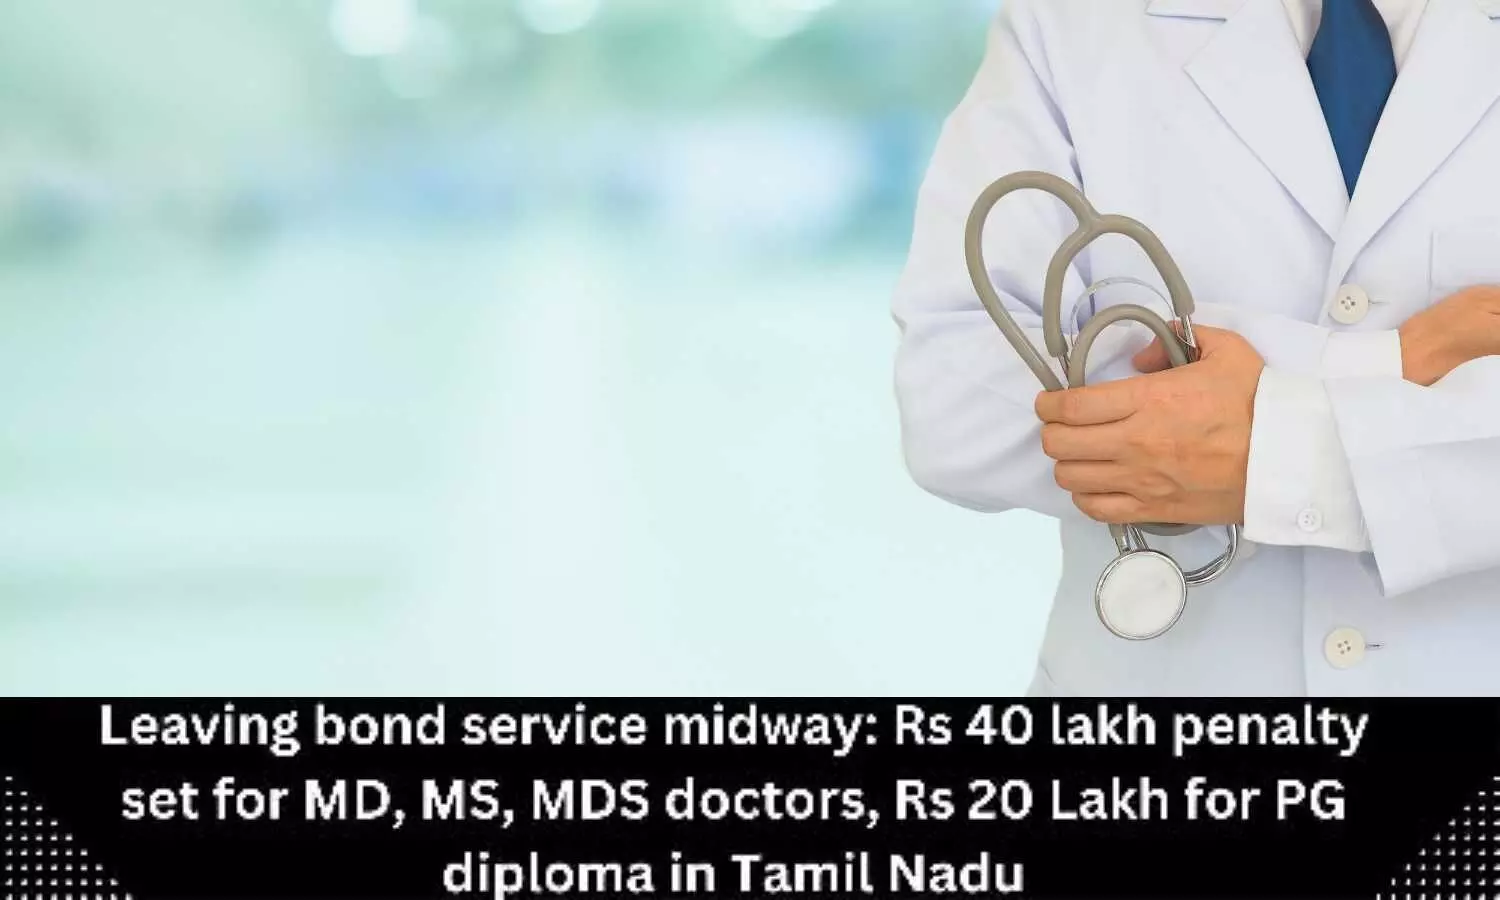 Leaving bond service midway: Rs 40 lakh penalty set for MD, MS, MDS doctors, Rs 20 lakh for PG diploma in Tamil Nadu